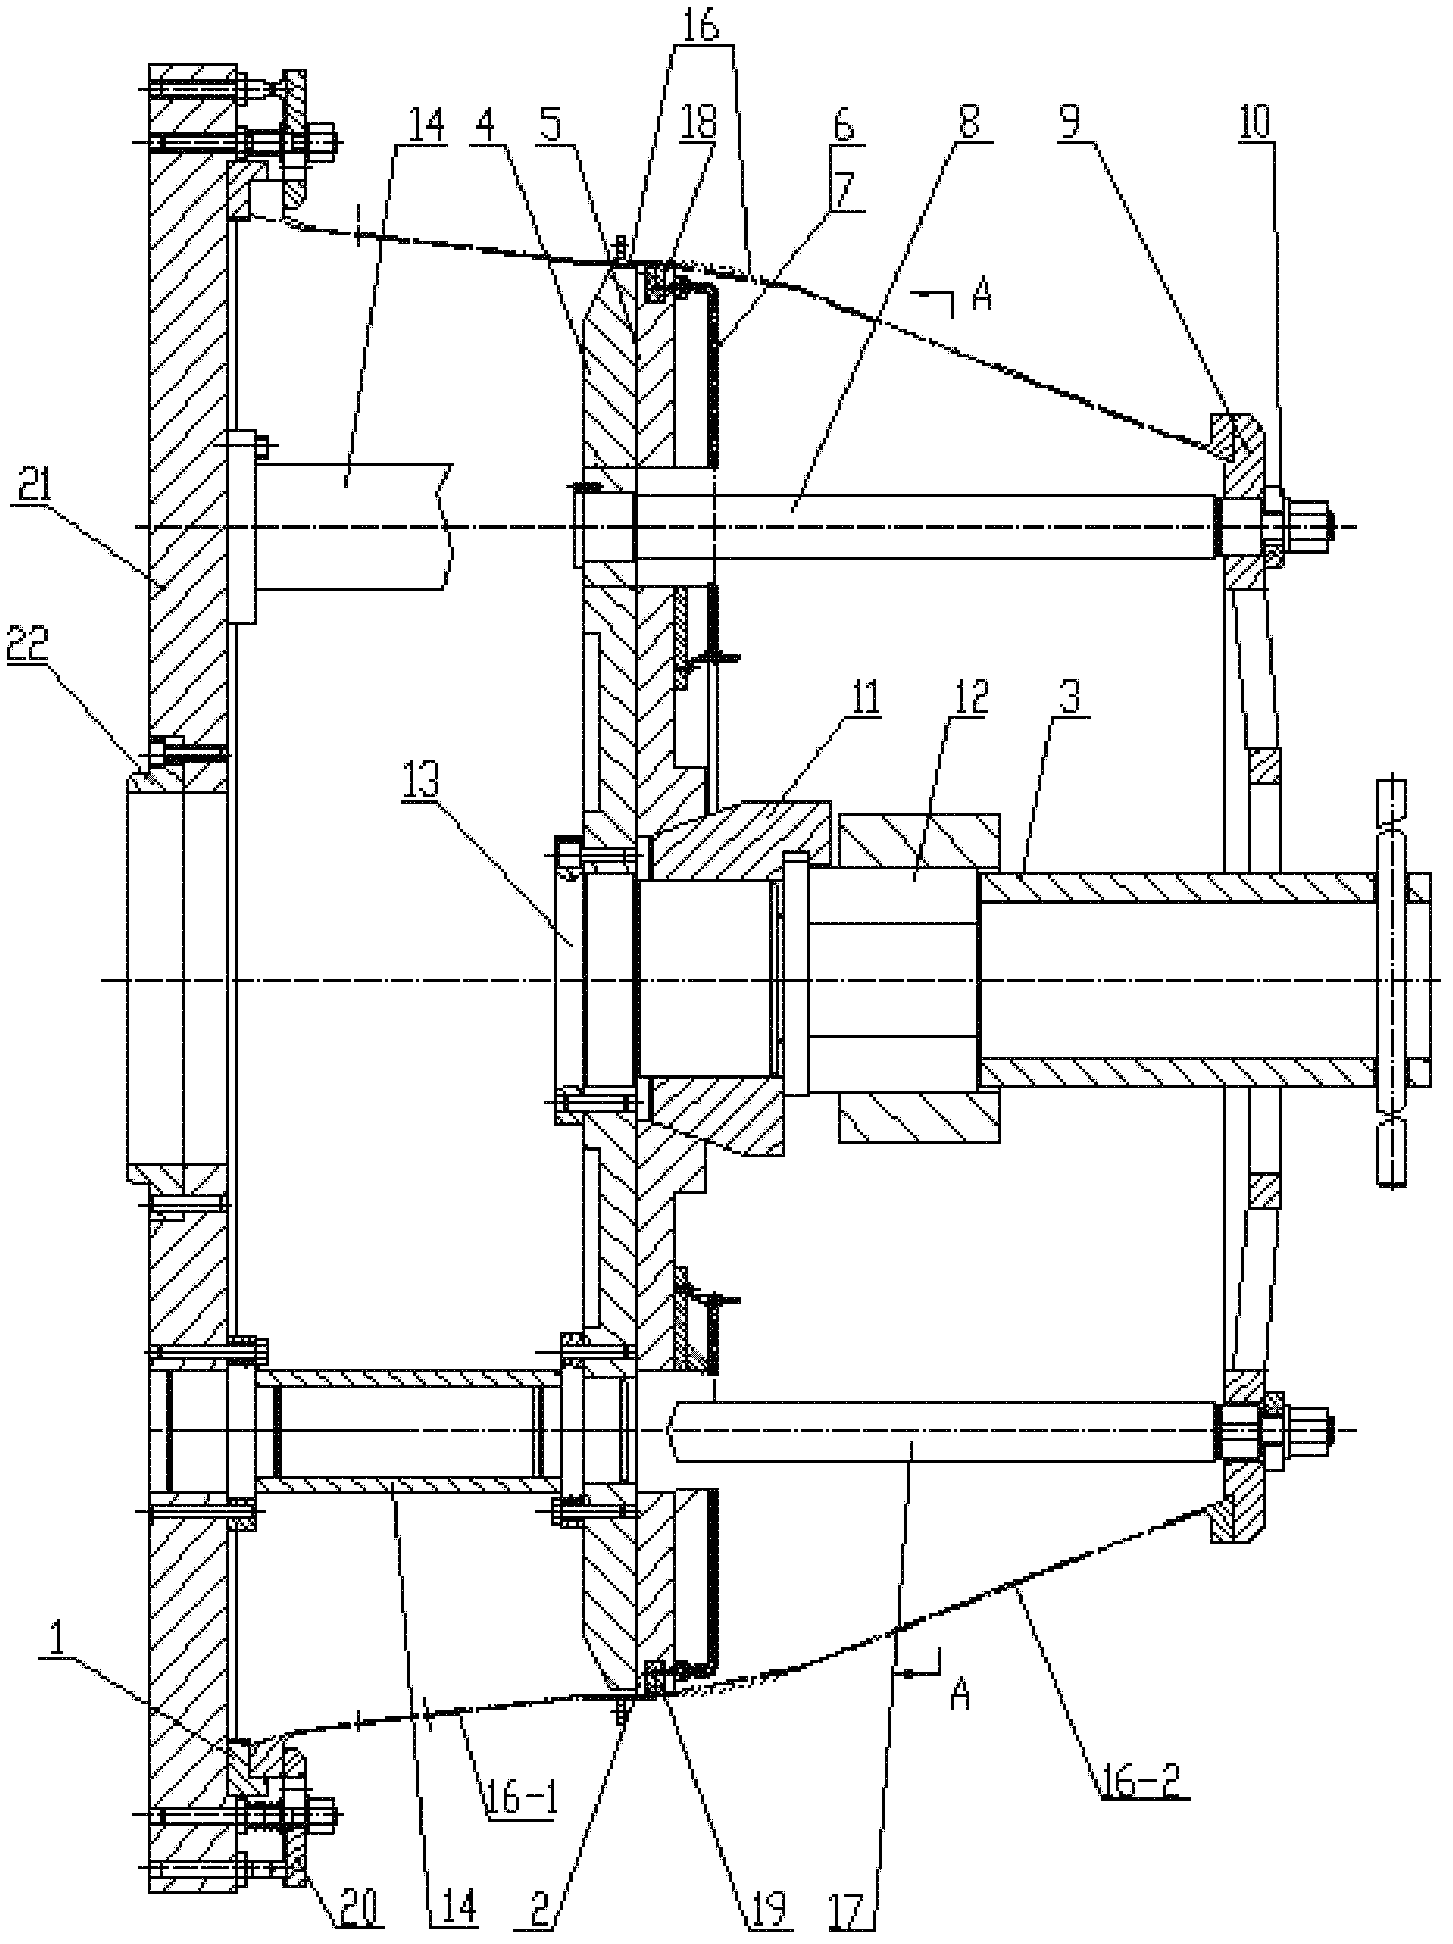 Welding fixture for thin-wall part